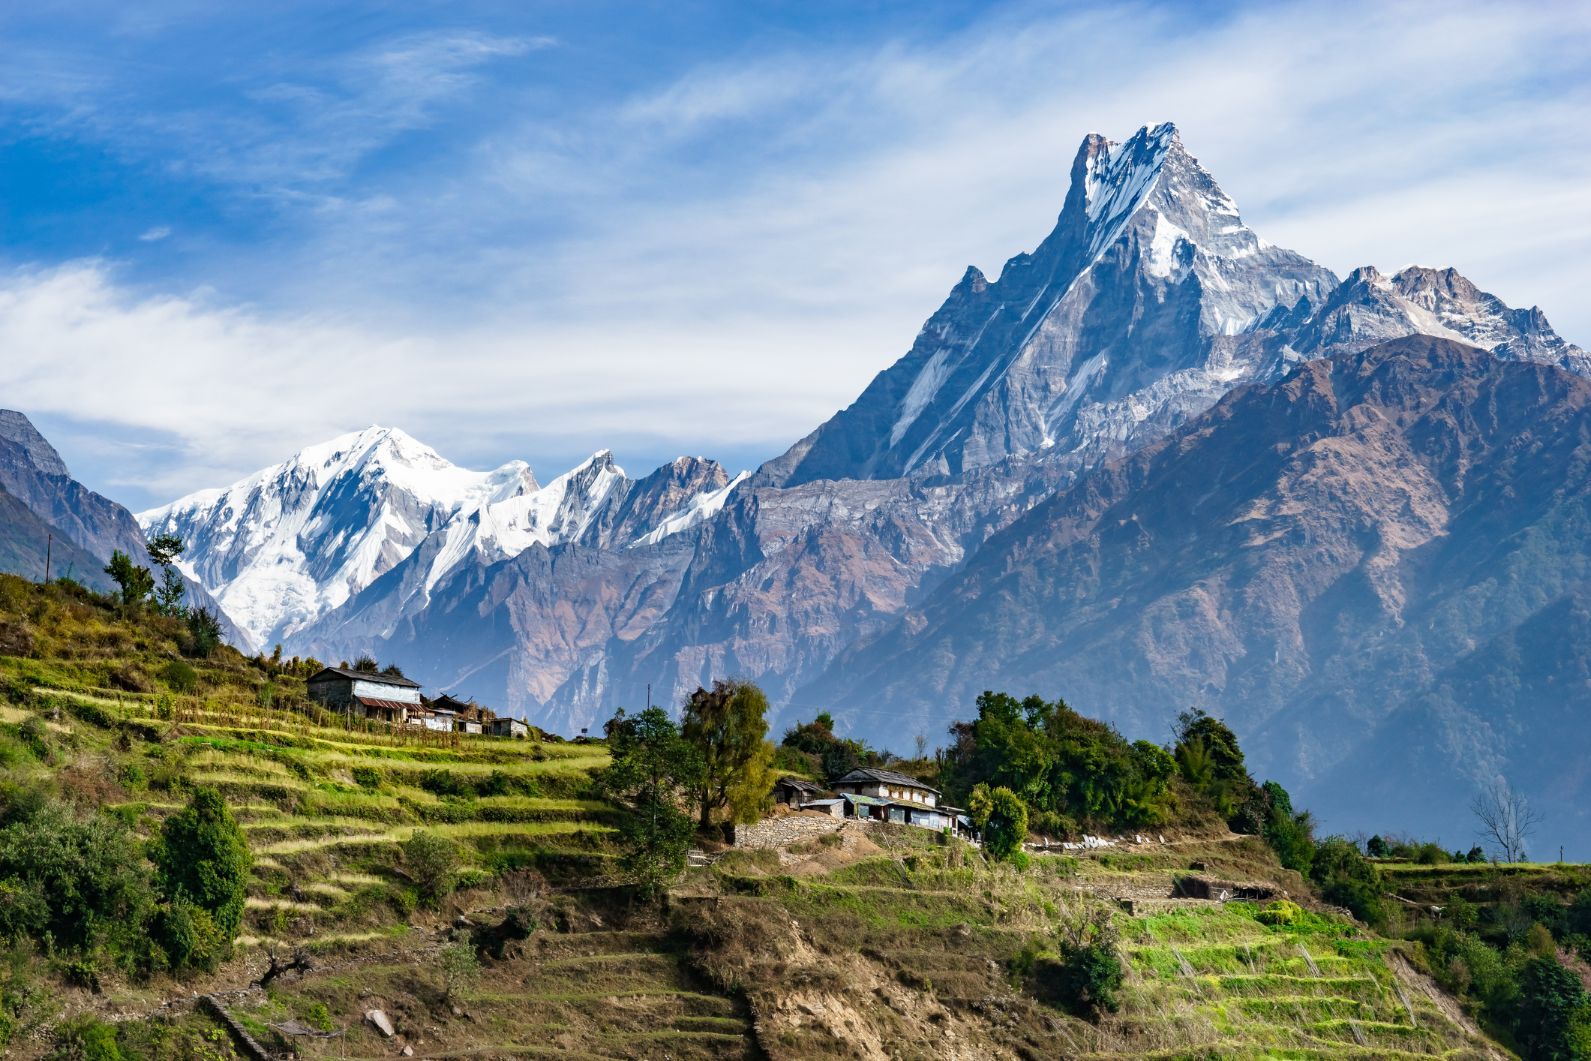 The spiky form of Machhapuchhre above terraced fields in Nepal, on the trek to Annapurna Base Camp